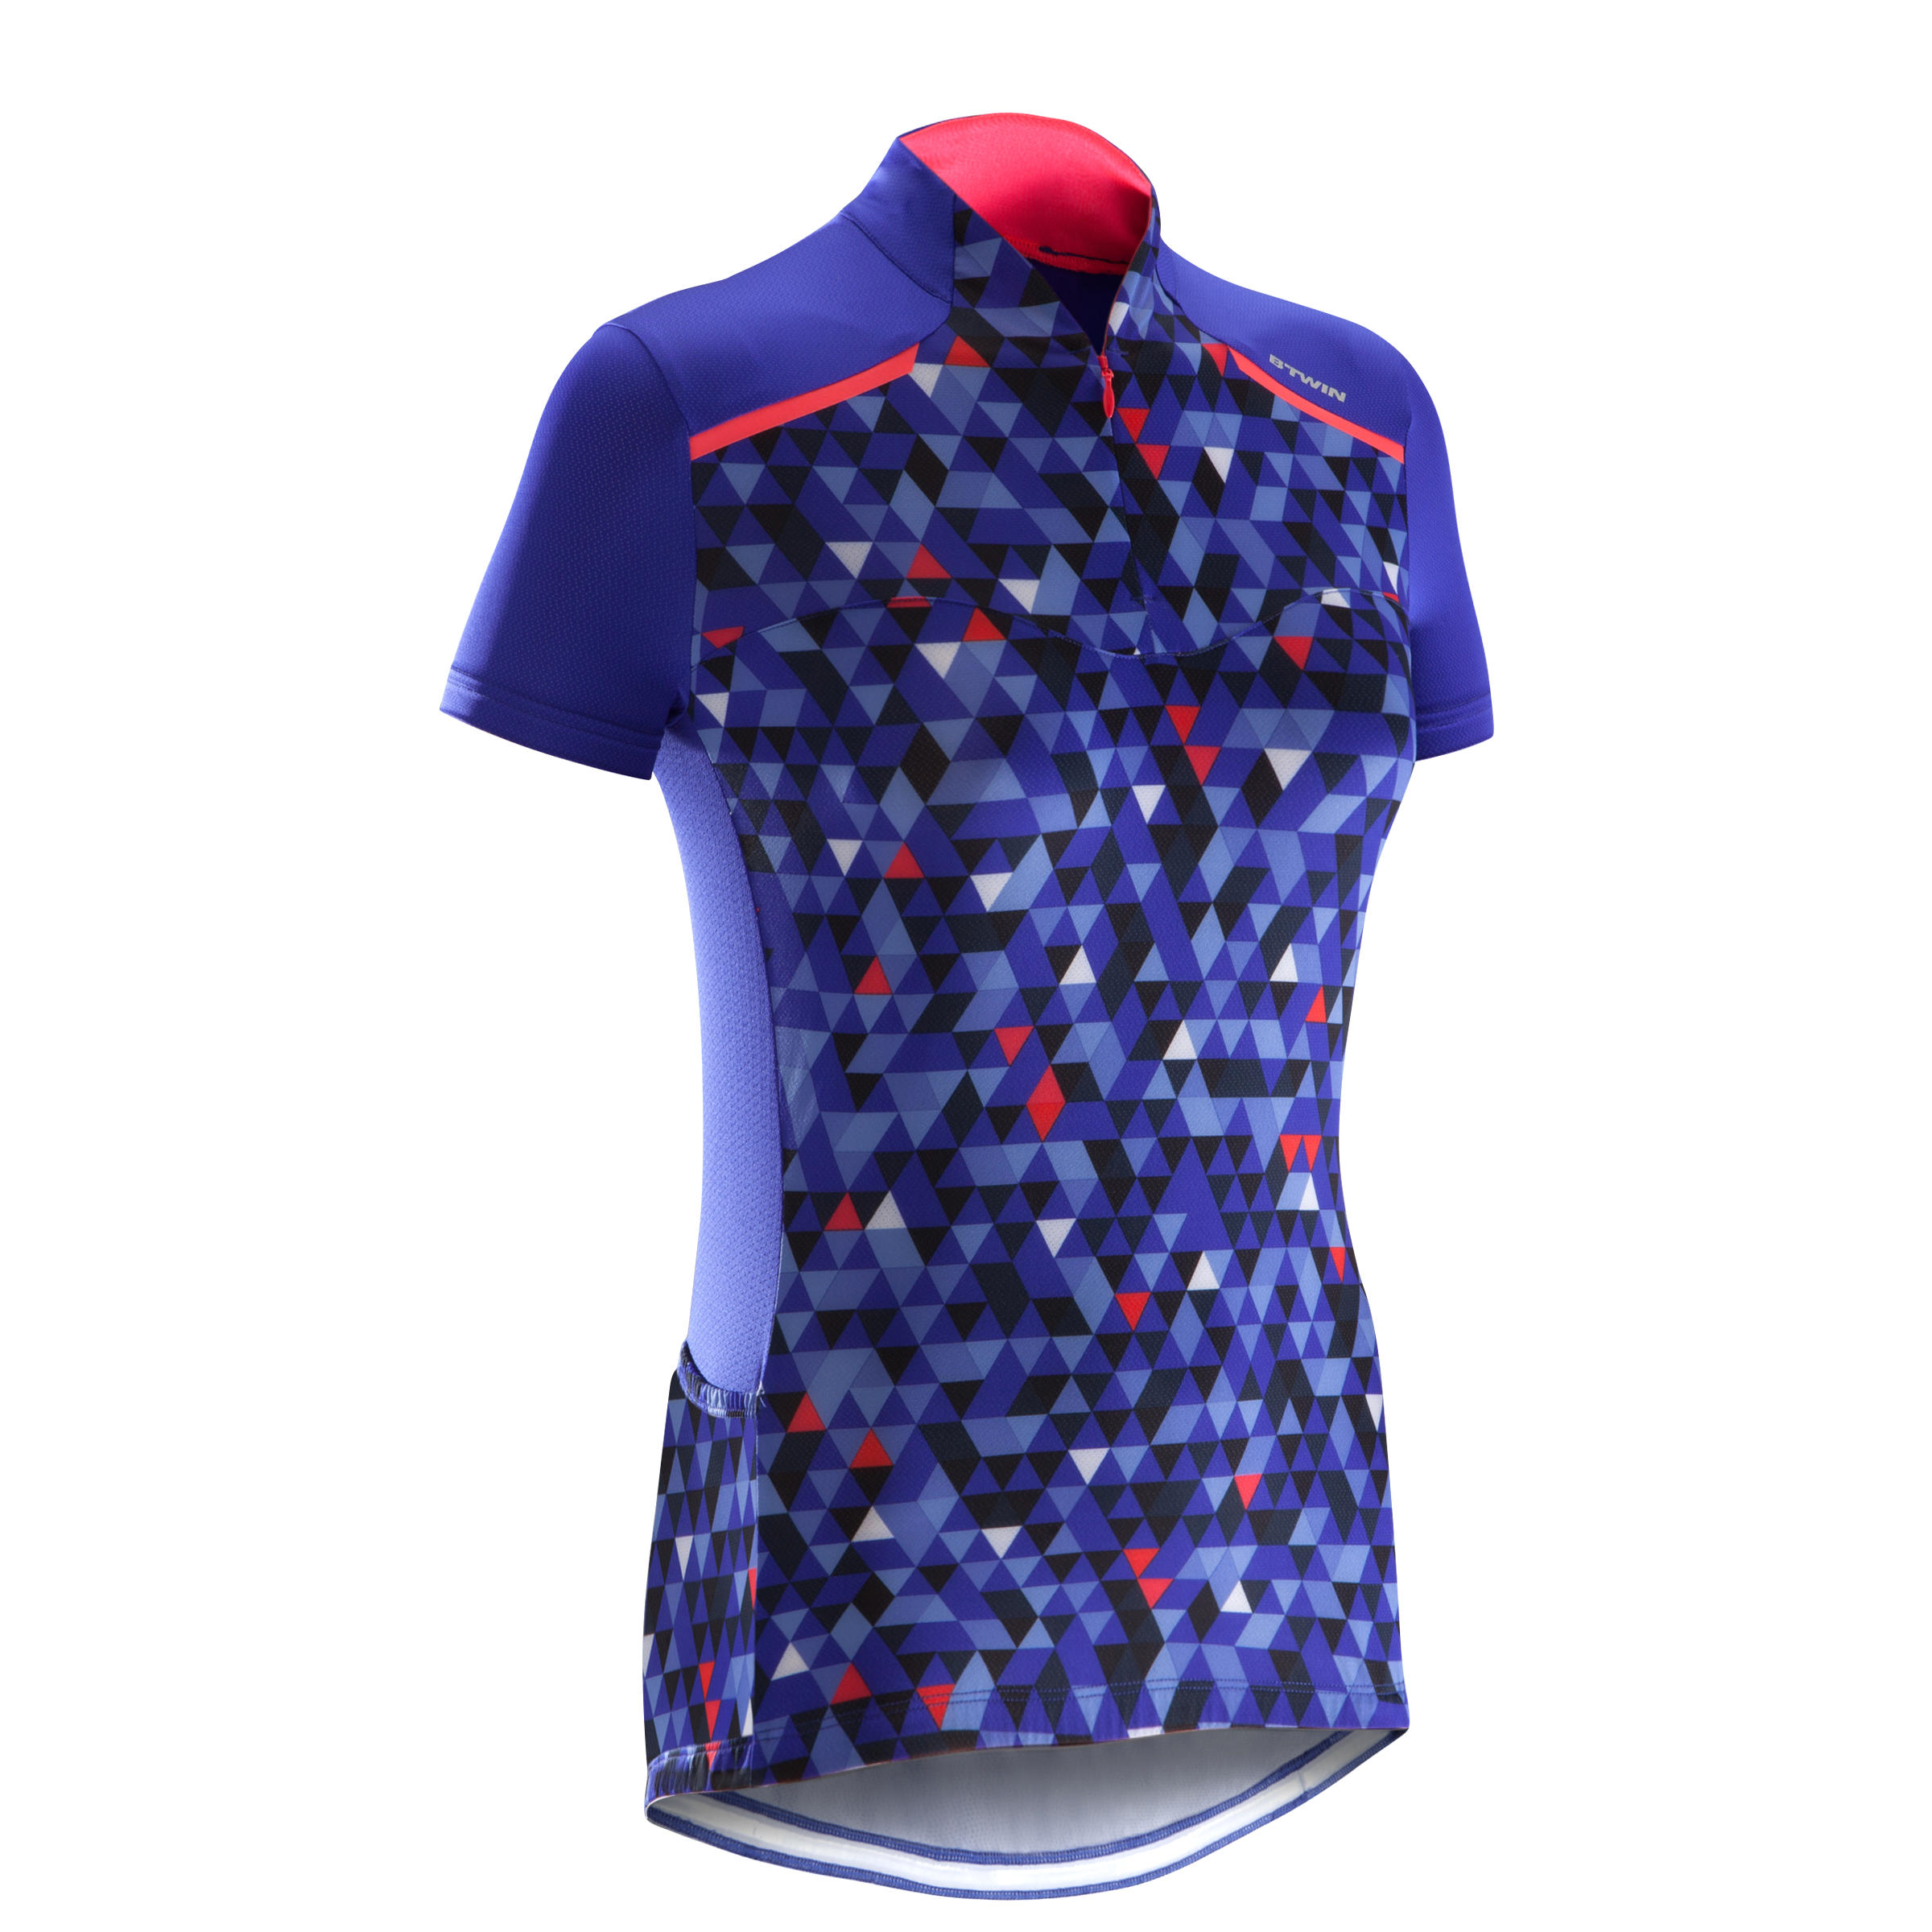 TRIBAN 500 Women's Short-Sleeved Cycling Jersey - Facet Blue